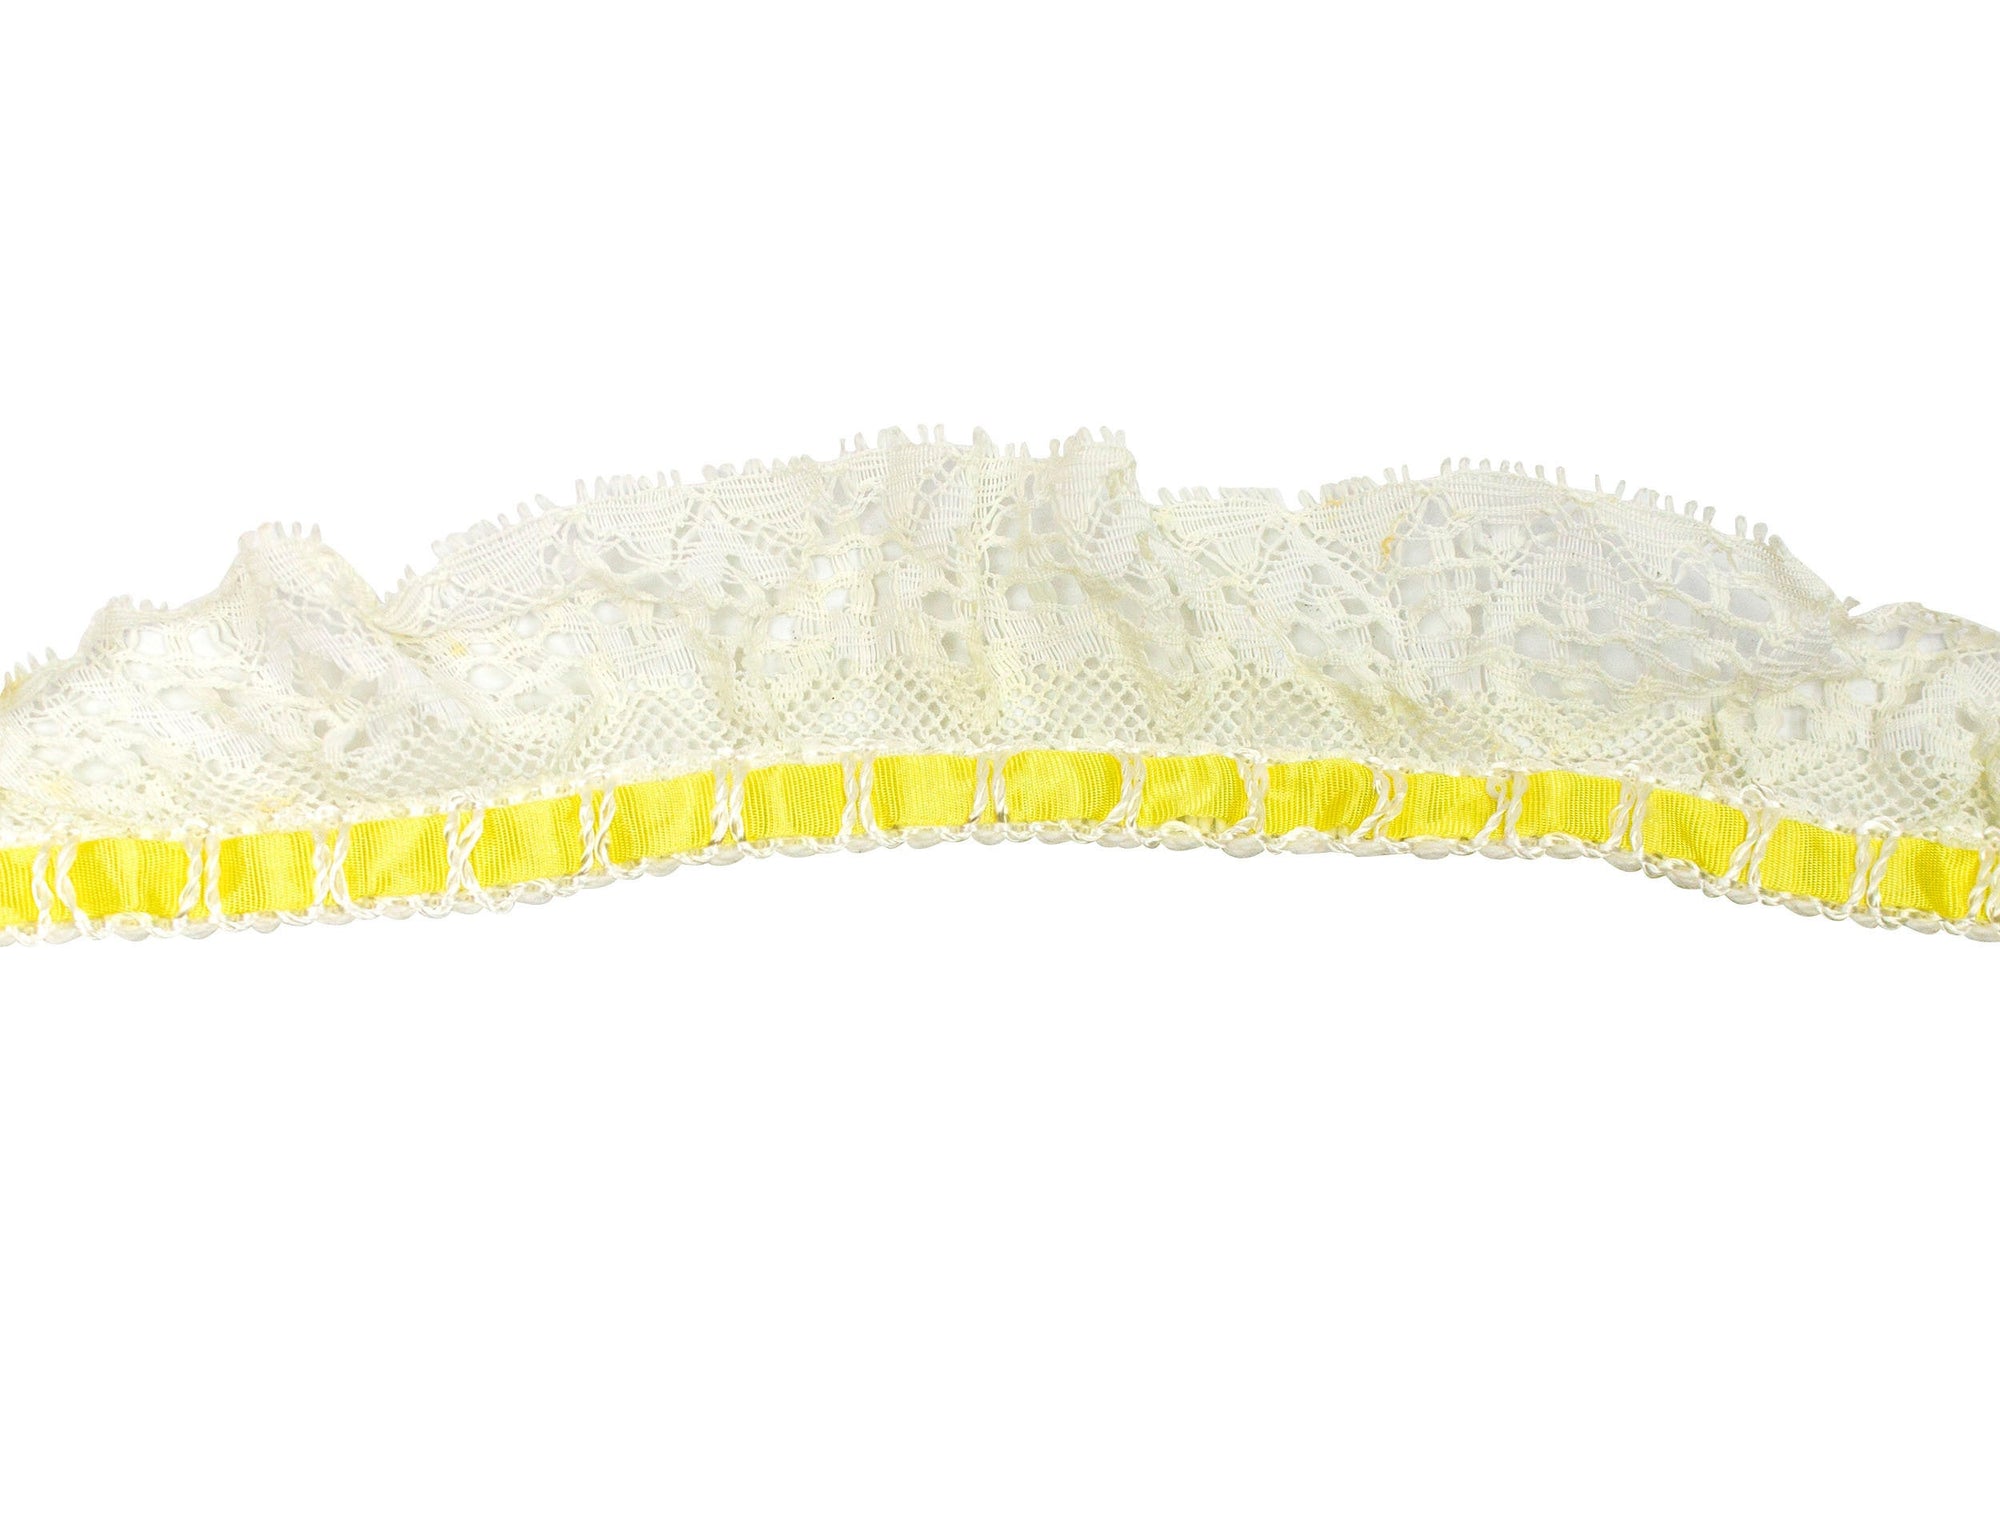 Vintage Lace Trim White Lace with Yellow Satin 1.5" - Sold by the Yard - Humboldt Haberdashery